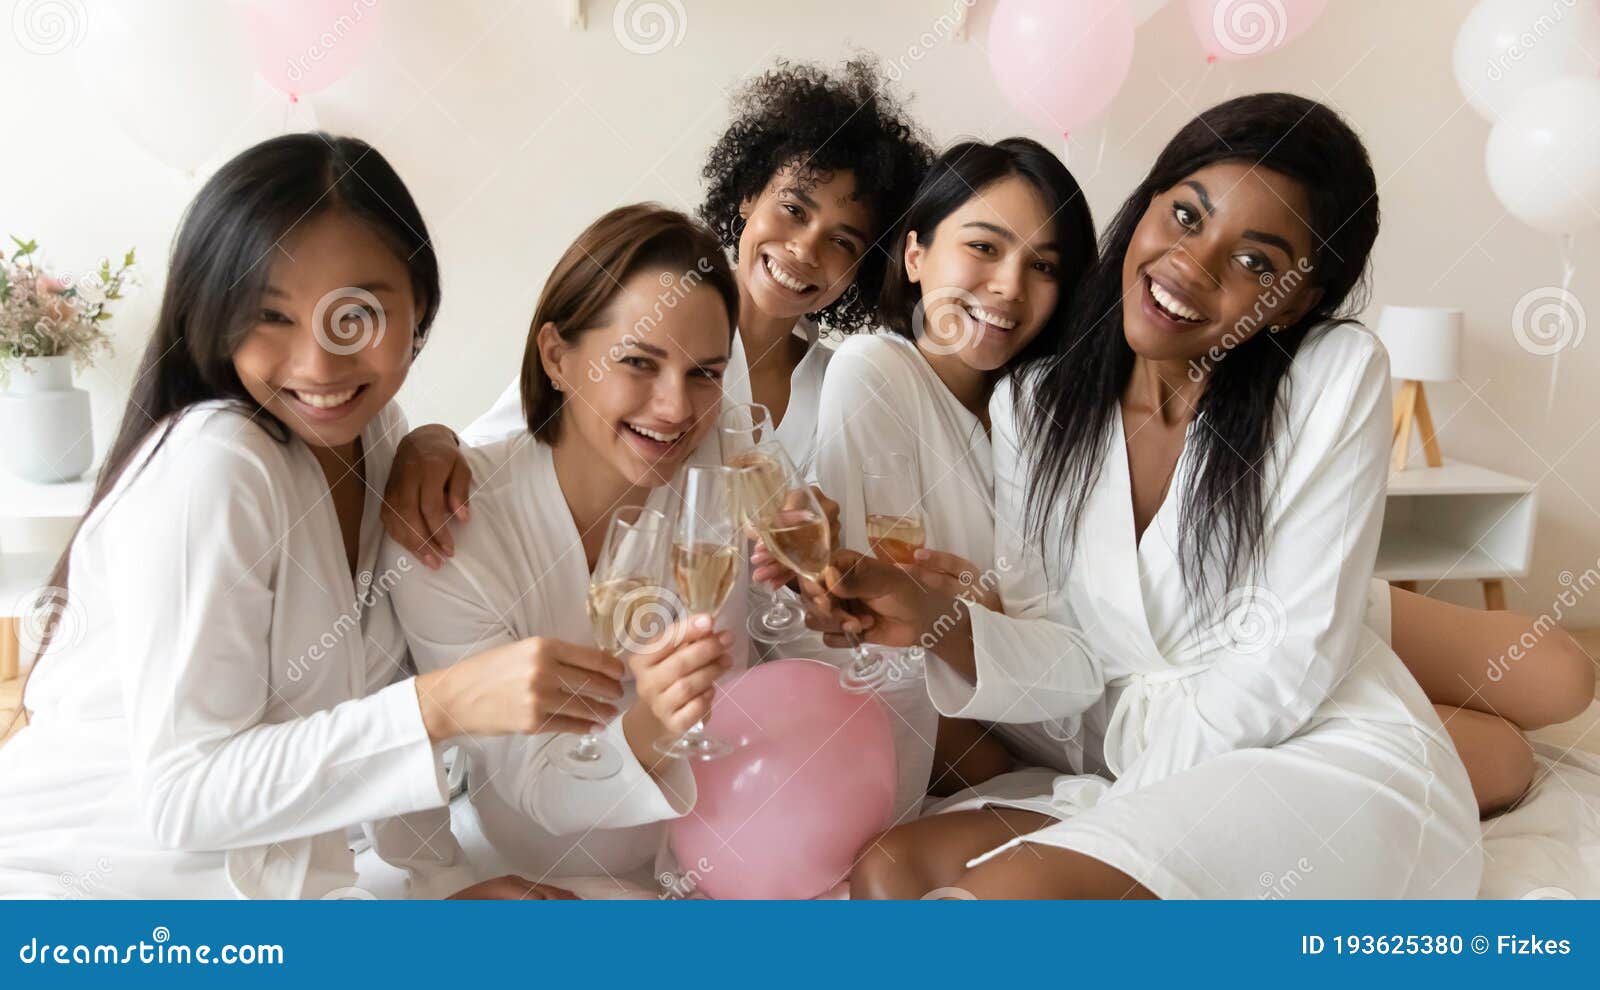 multiracial girls in bathrobes holding champagne glasses celebrating bachelorette party